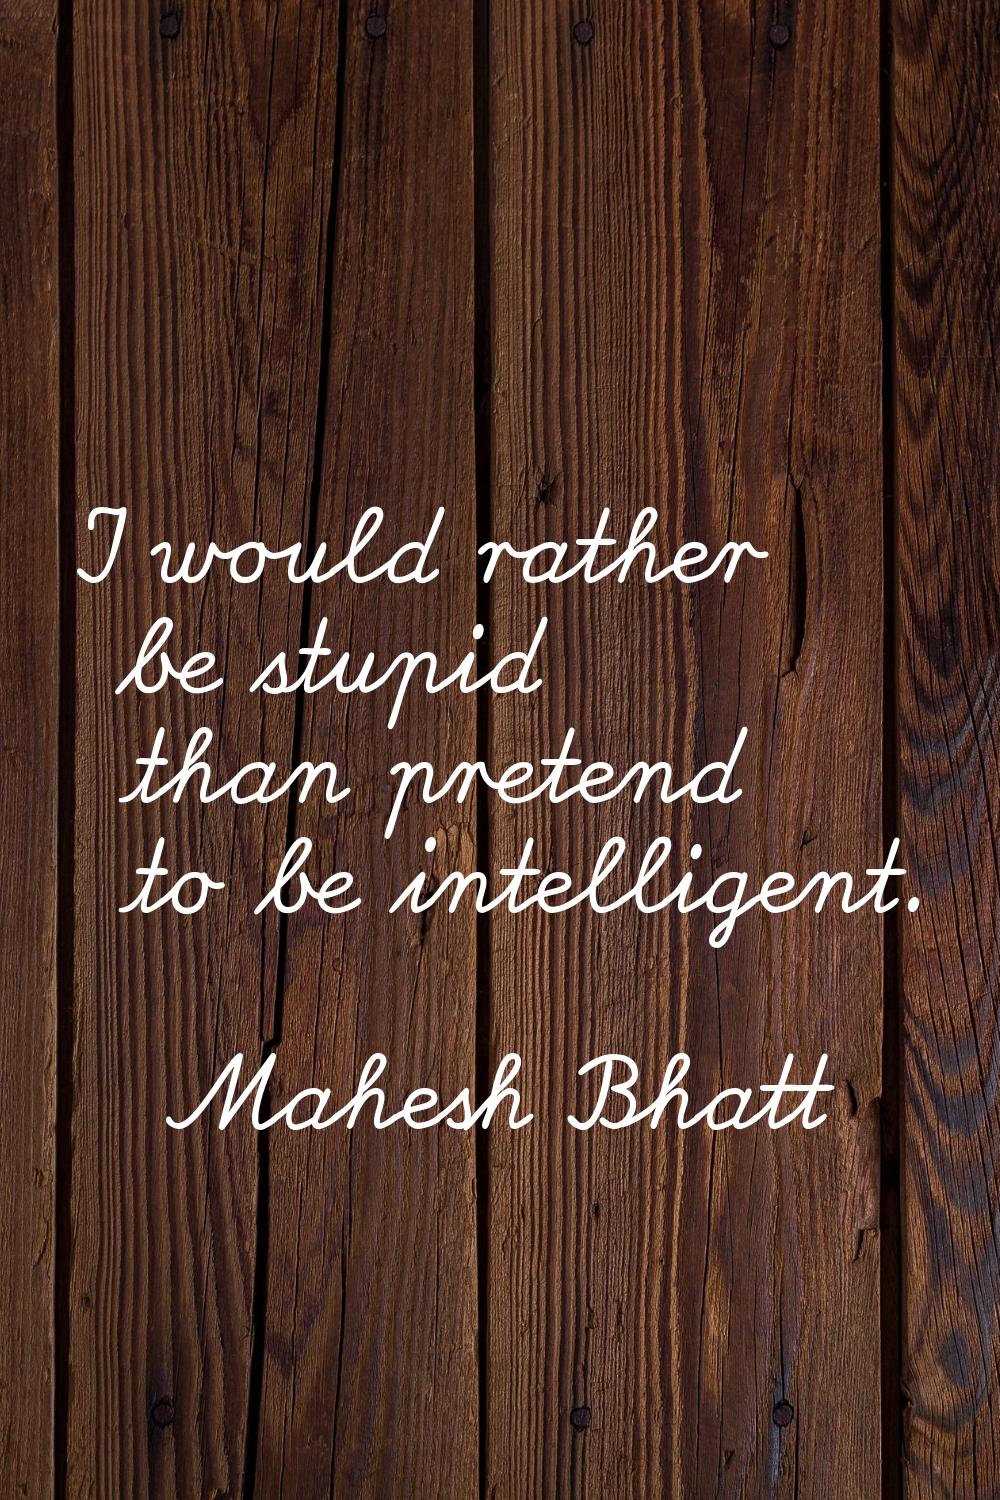 I would rather be stupid than pretend to be intelligent.